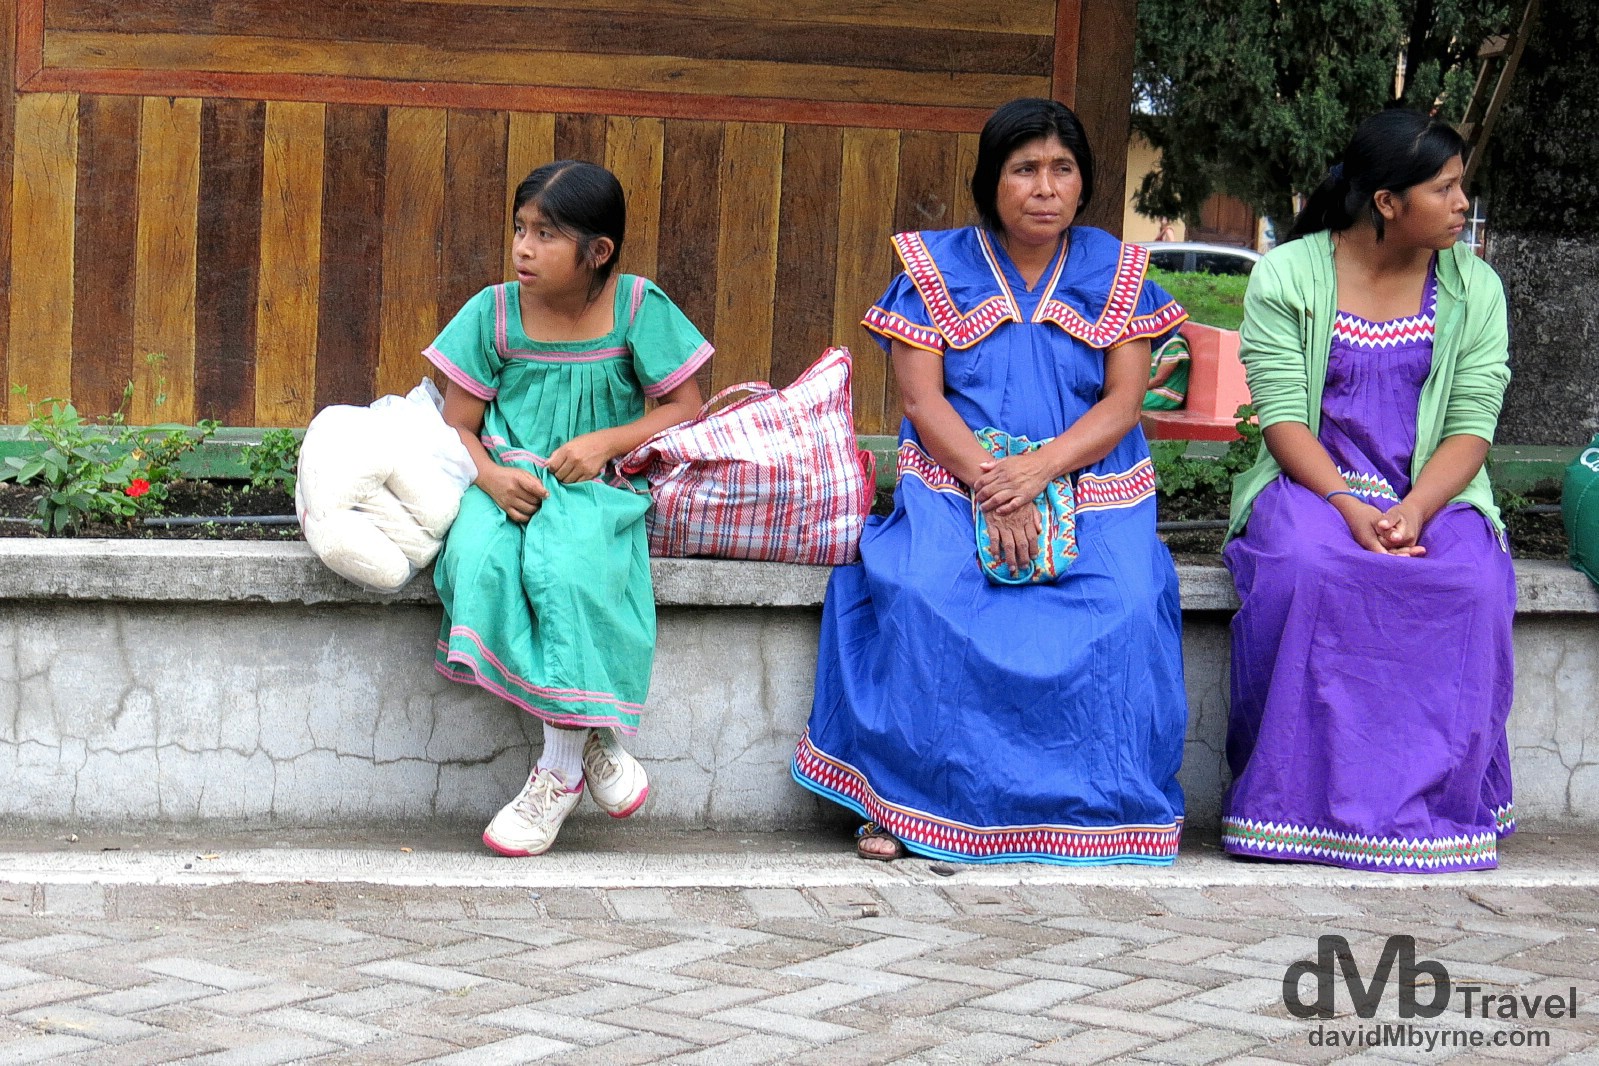 Local villagers in the mountain-valley town of Boquete, Panama. June 29th 2013.